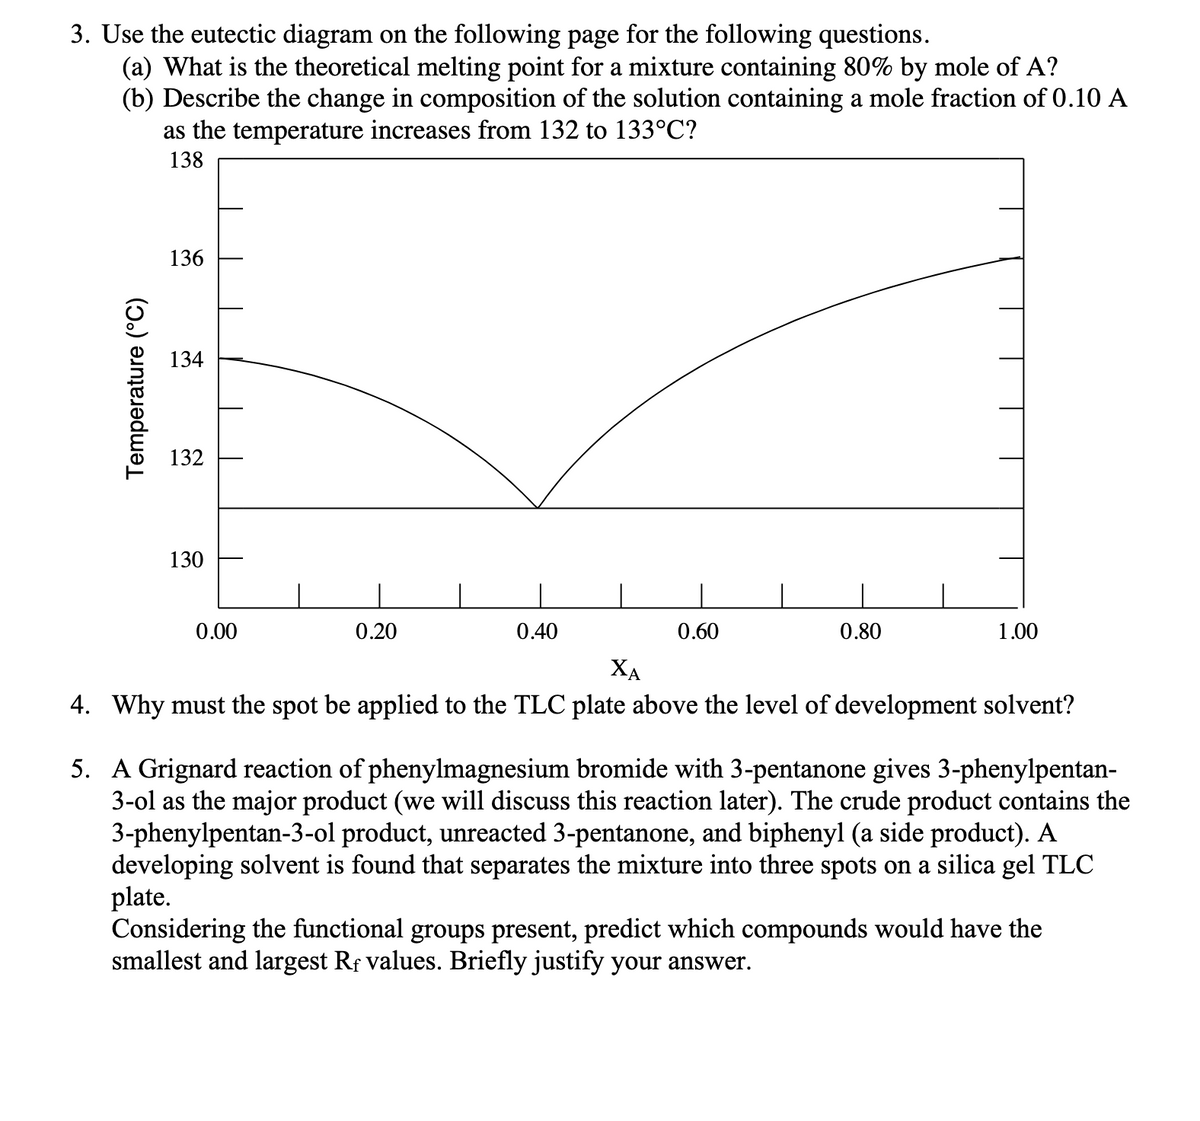 3. Use the eutectic diagram on the following page for the following questions.
(a) What is the theoretical melting point for a mixture containing 80% by mole of A?
(b) Describe the change in composition of the solution containing a mole fraction of 0.10 A
as the temperature increases from 132 to 133°C?
138
136
134
132
130
0.00
0.20
0.40
0.60
0.80
1.00
XA
4. Why must the spot be applied to the TLC plate above the level of development solvent?
5. A Grignard reaction of phenylmagnesium bromide with 3-pentanone gives 3-phenylpentan-
3-ol as the major product (we will discuss this reaction later). The crude product contains the
3-phenylpentan-3-ol product, unreacted 3-pentanone, and biphenyl (a side product). A
developing solvent is found that separates the mixture into three spots on a silica gel TLC
plate.
Considering the functional groups present, predict which compounds would have the
smallest and largest Rf values. Briefly justify your answer.
Temperature (°C)
